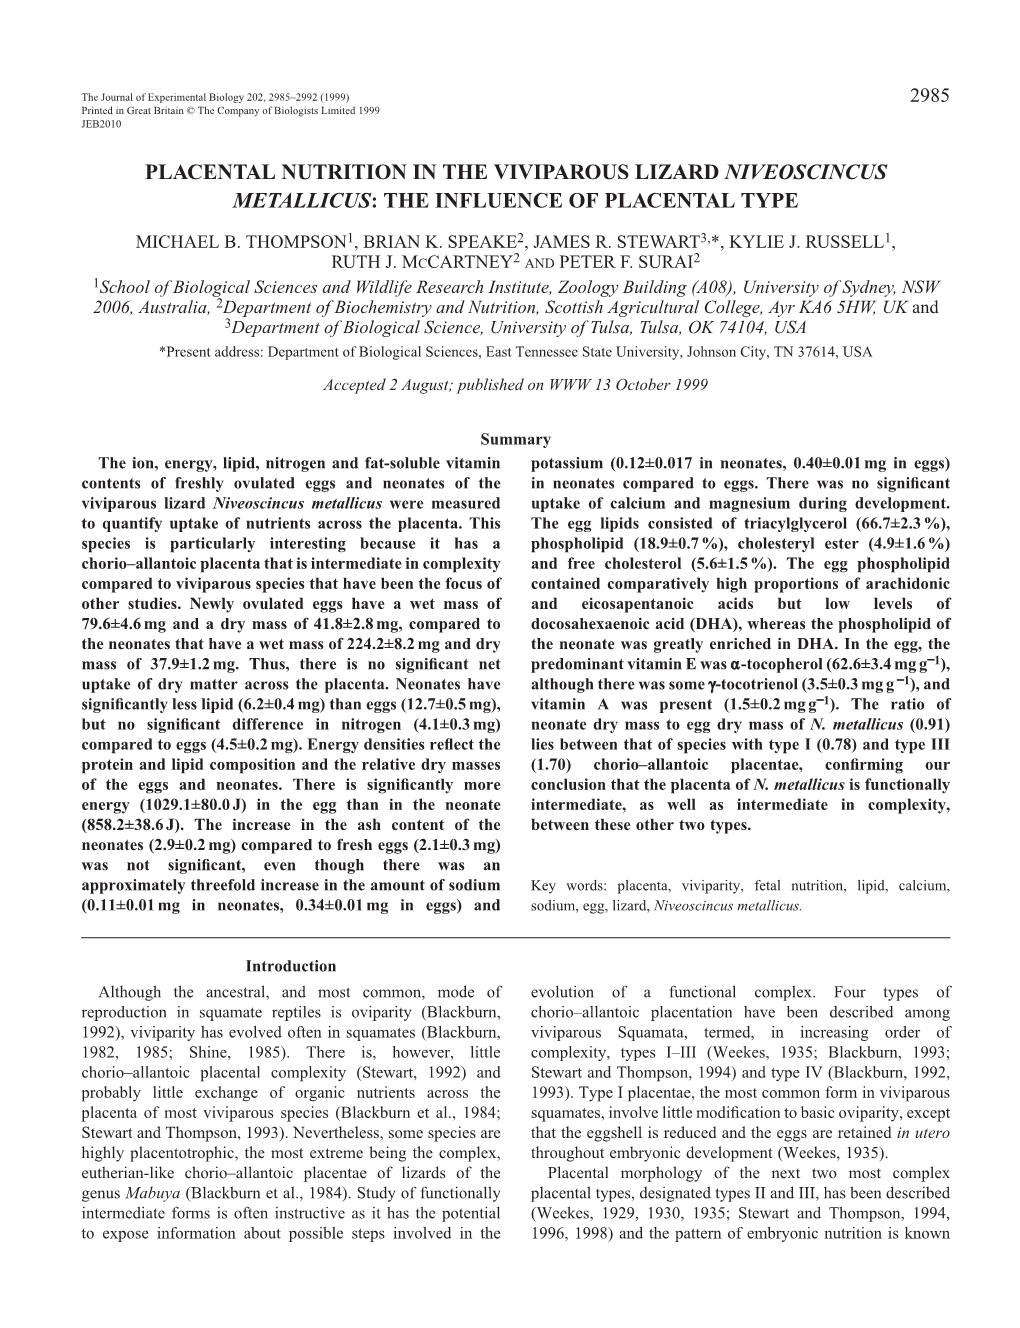 Placental Nutrition in the Viviparous Lizard Niveoscincus Metallicus: the Influence of Placental Type